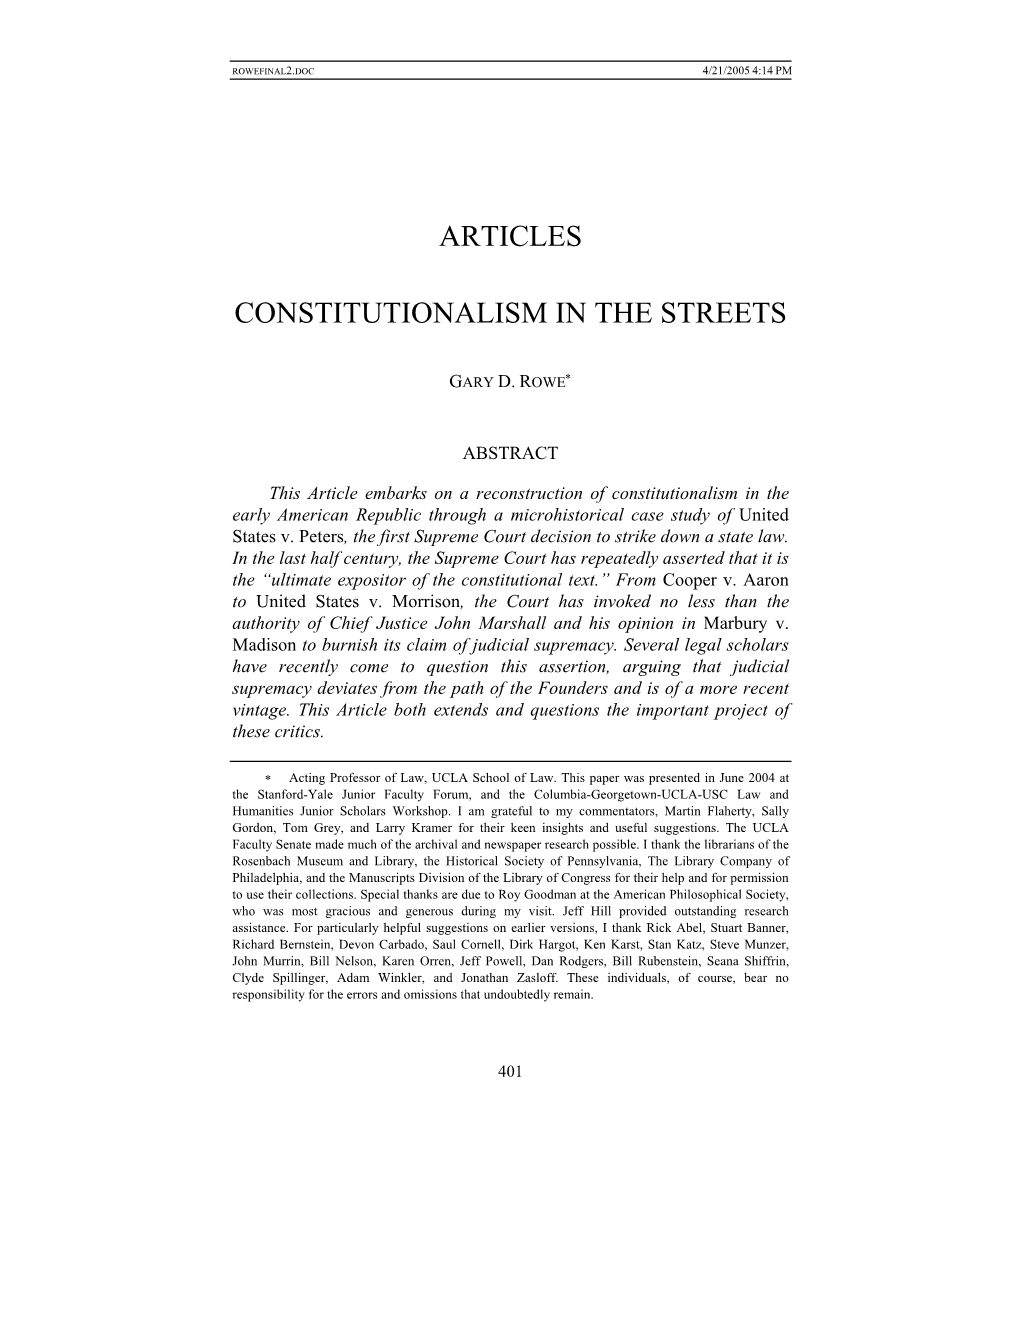 Constitutionalism in the Streets